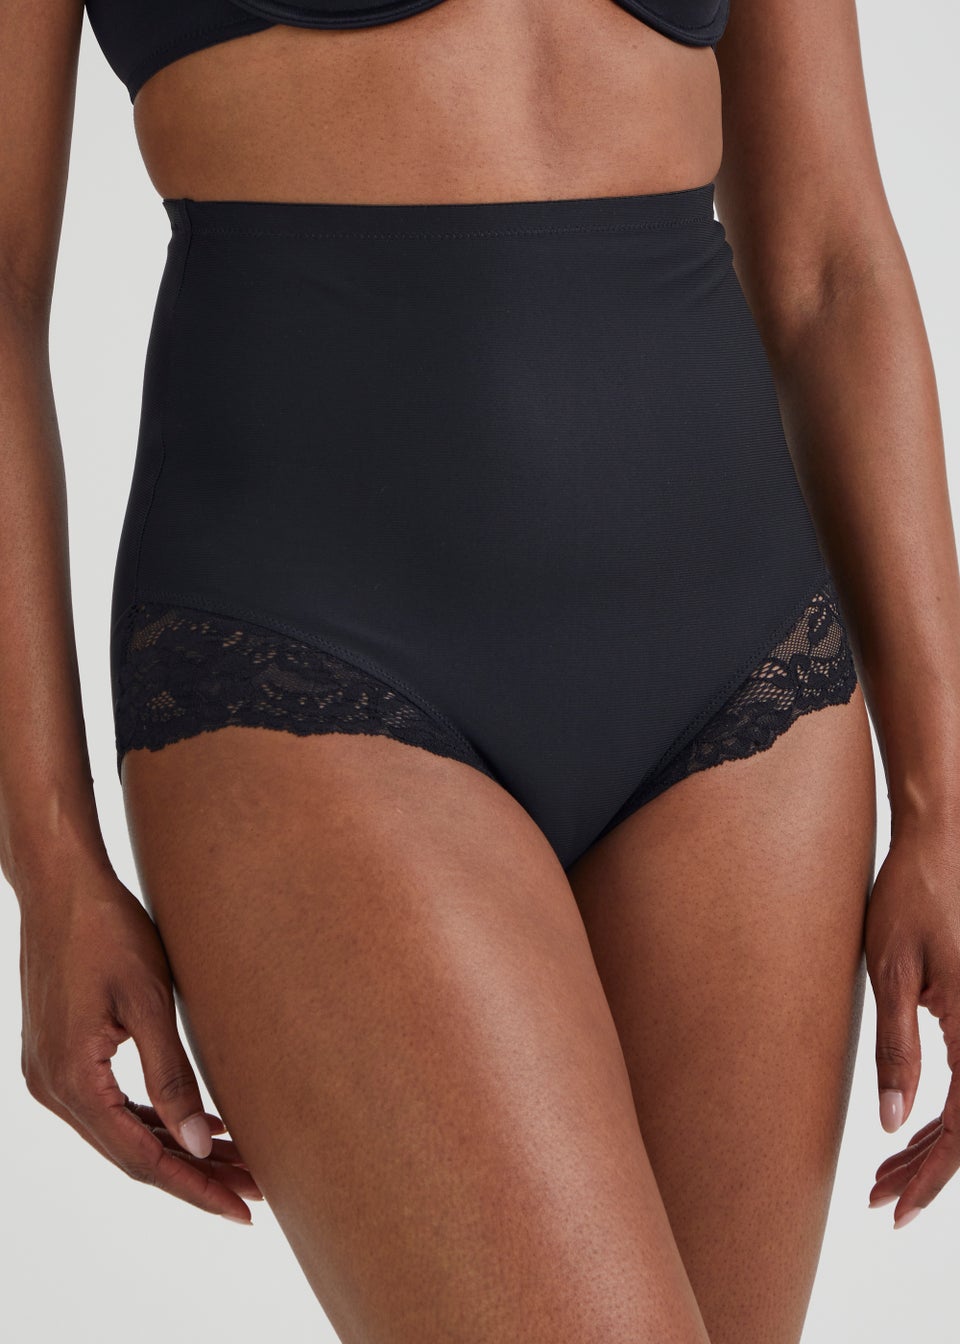 Black Lace High Waisted Medium Control Knickers